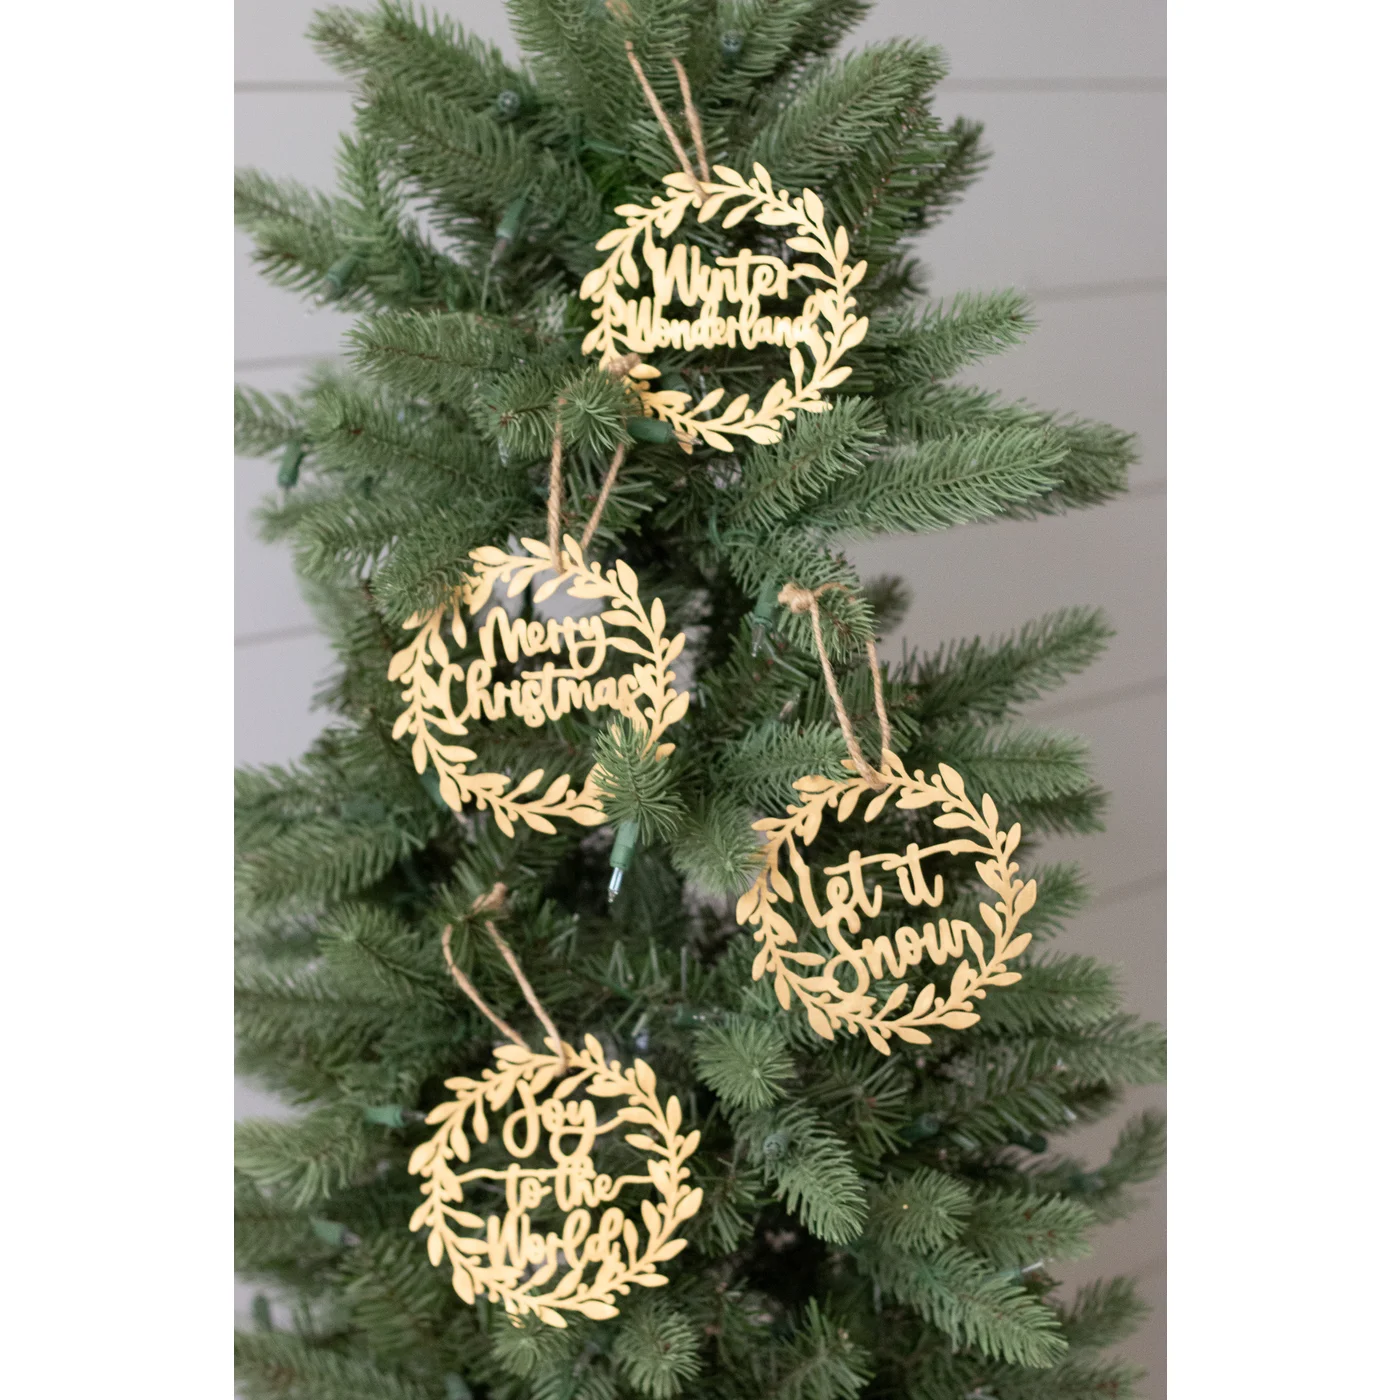 Set of 4 Gold Wreaths with Winter Sayings Ornaments